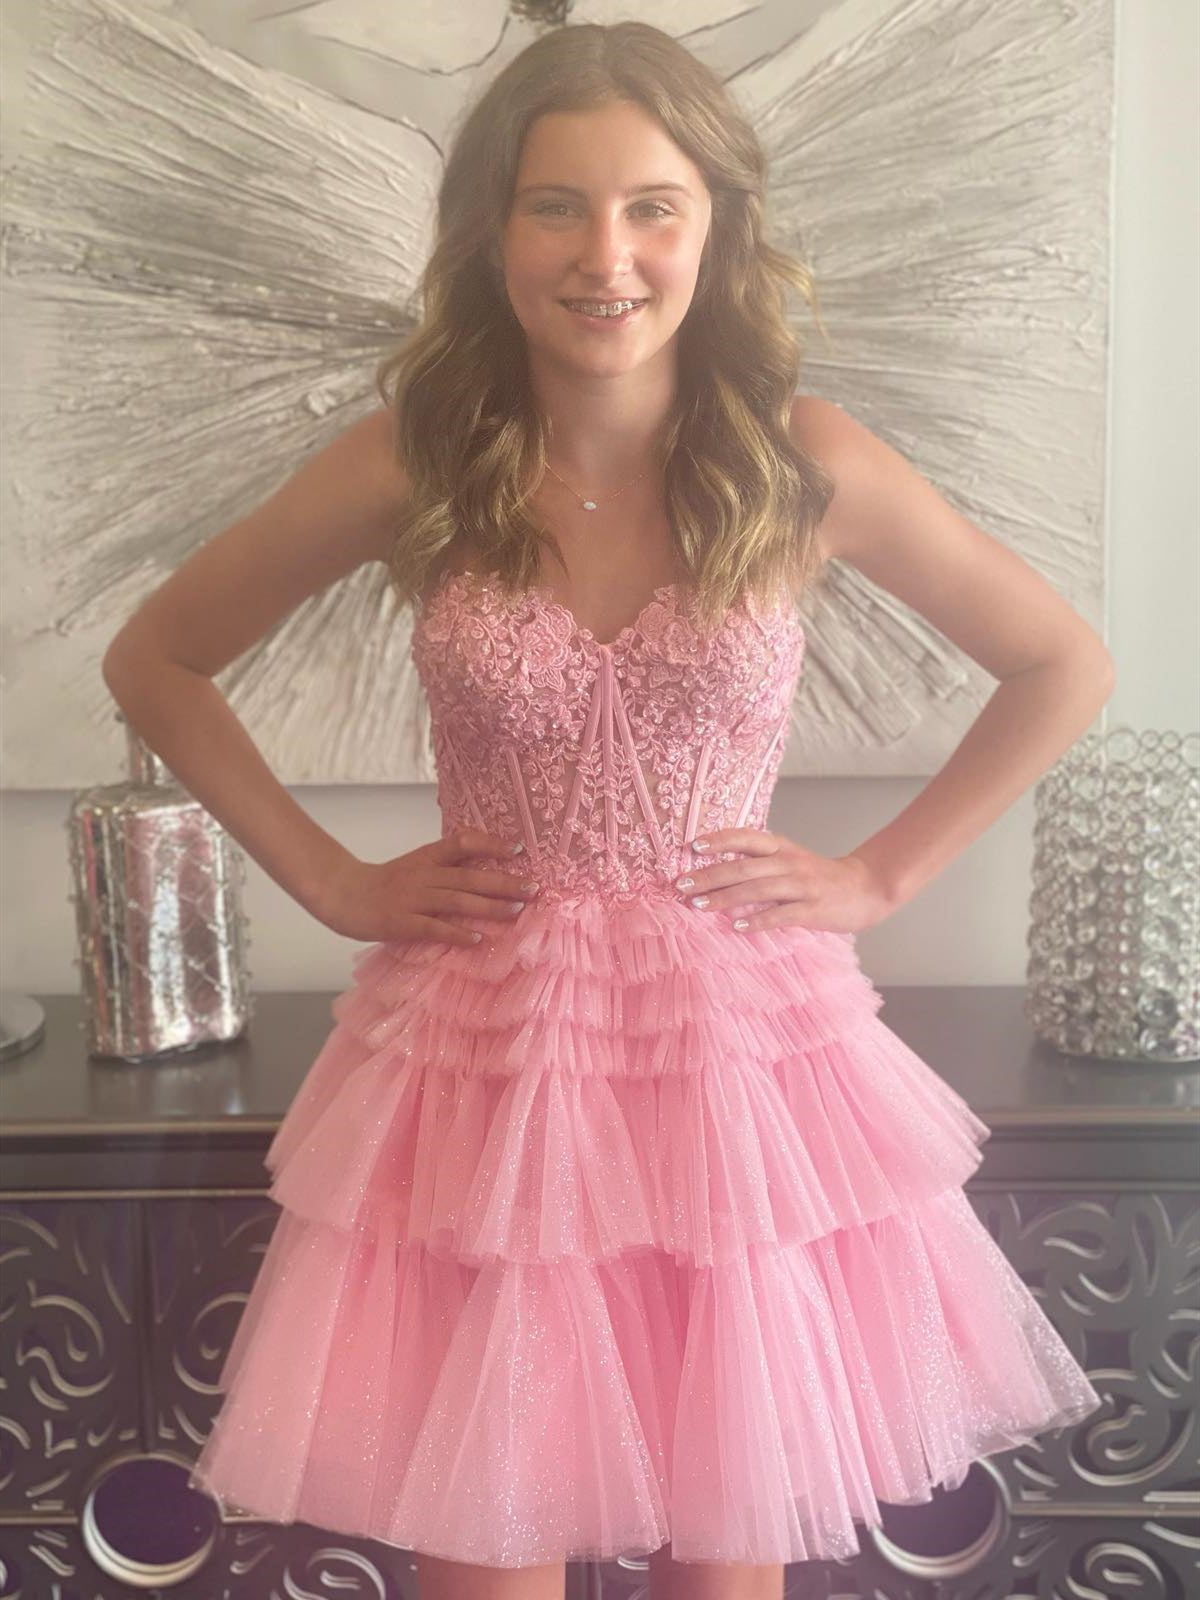 Strapless Pink Lace Short Prom Dresses, Pink Lace Homecoming